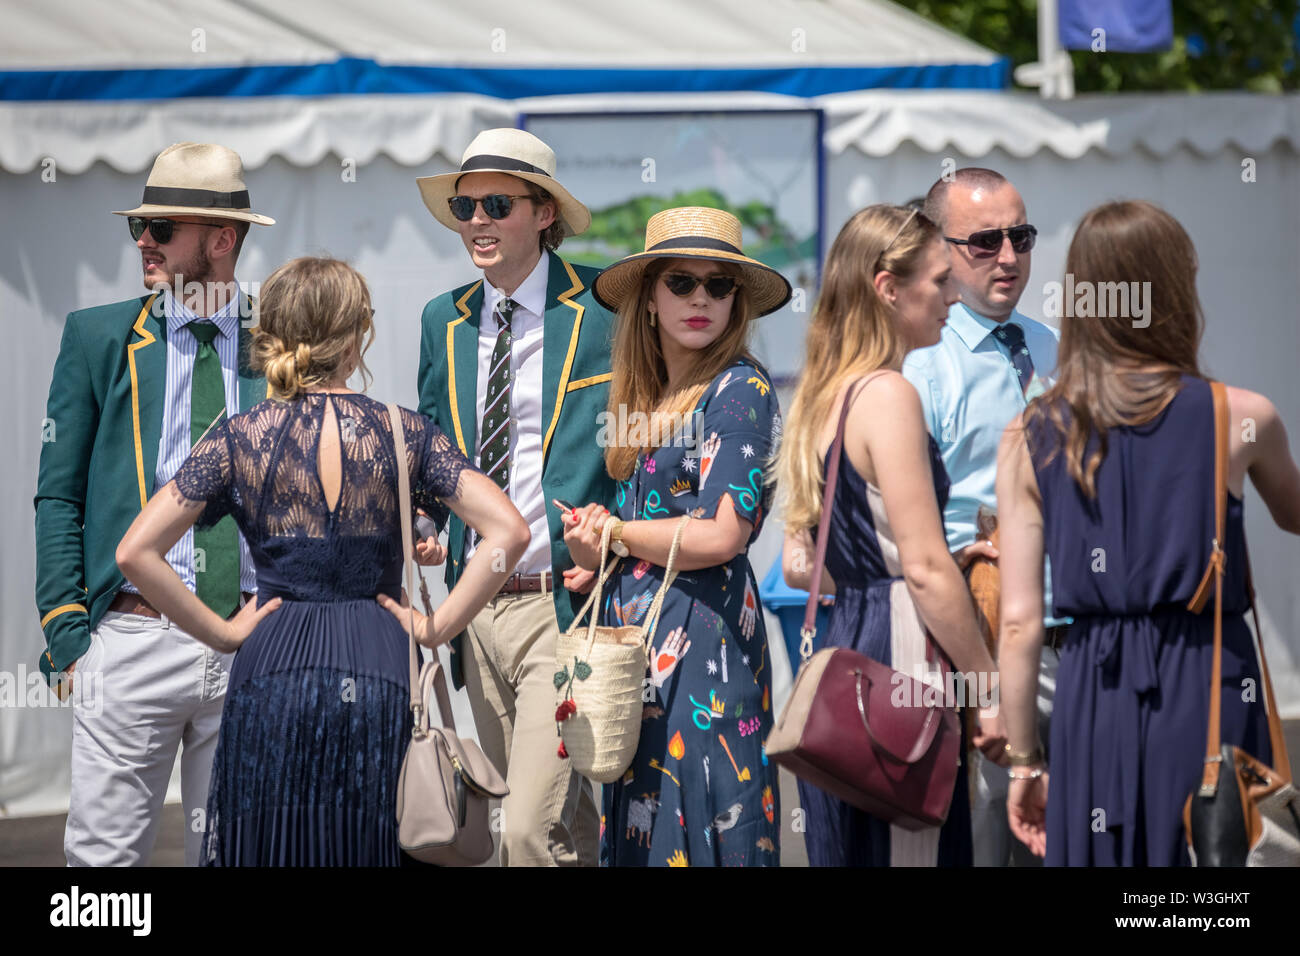 Arriving for Henley Royal Regatta 2019 in Oxfordshire. The five day Henley Royal Regatta is now in its 180th year. The event is one of the highlights of the English social season. UK. Stock Photo